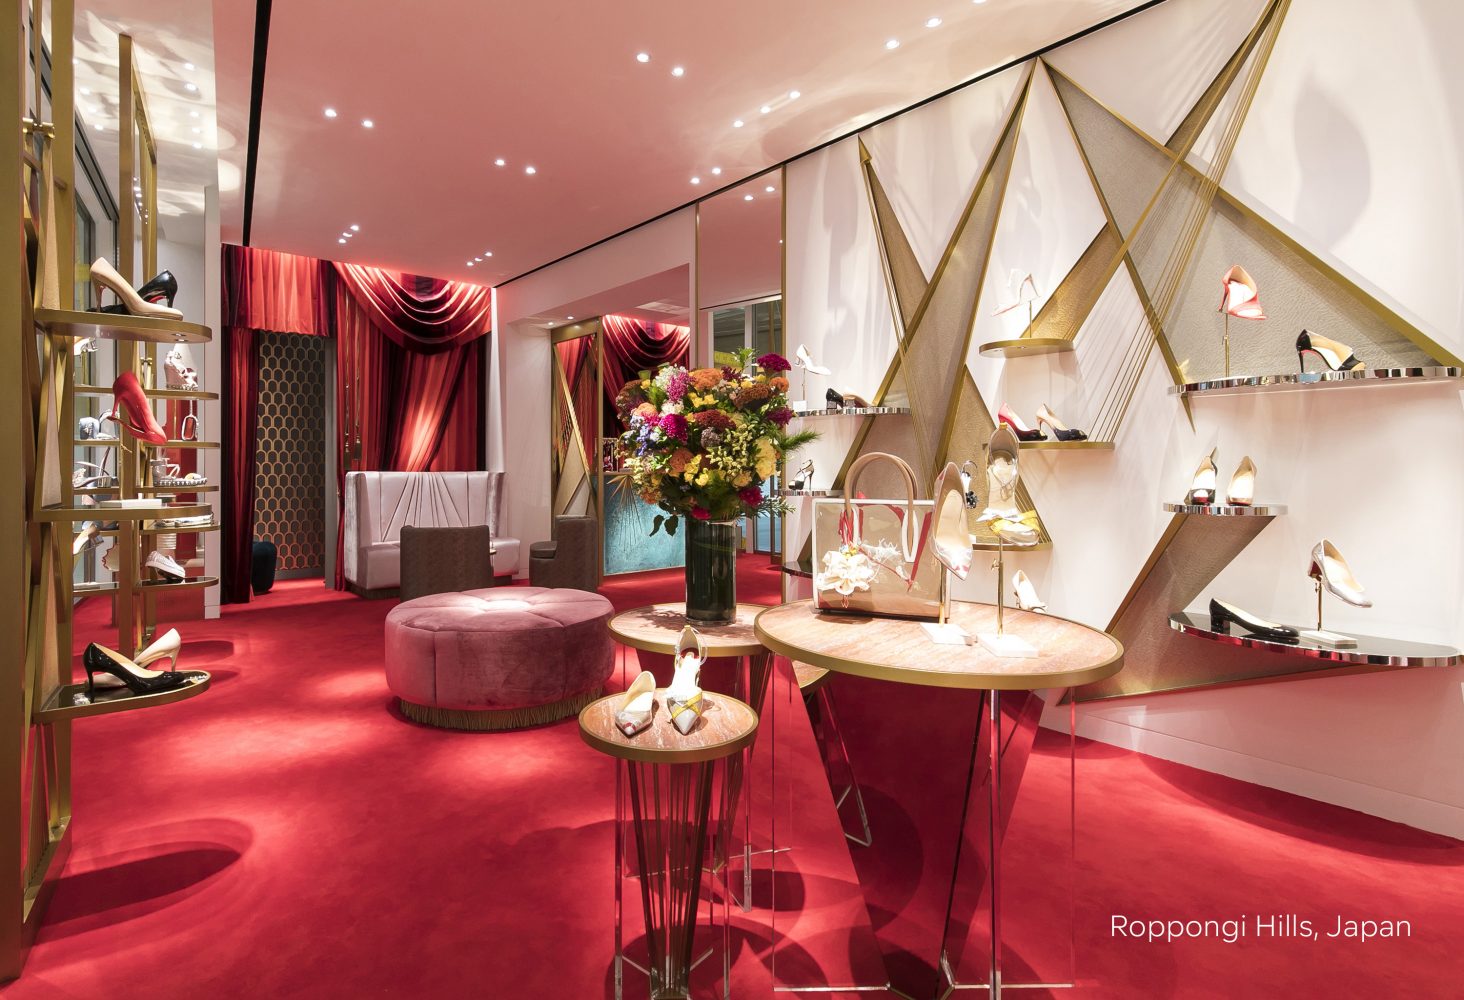 Seating area and shoe display found at Christian Louboutin concessions retail experience design, designed by Household.